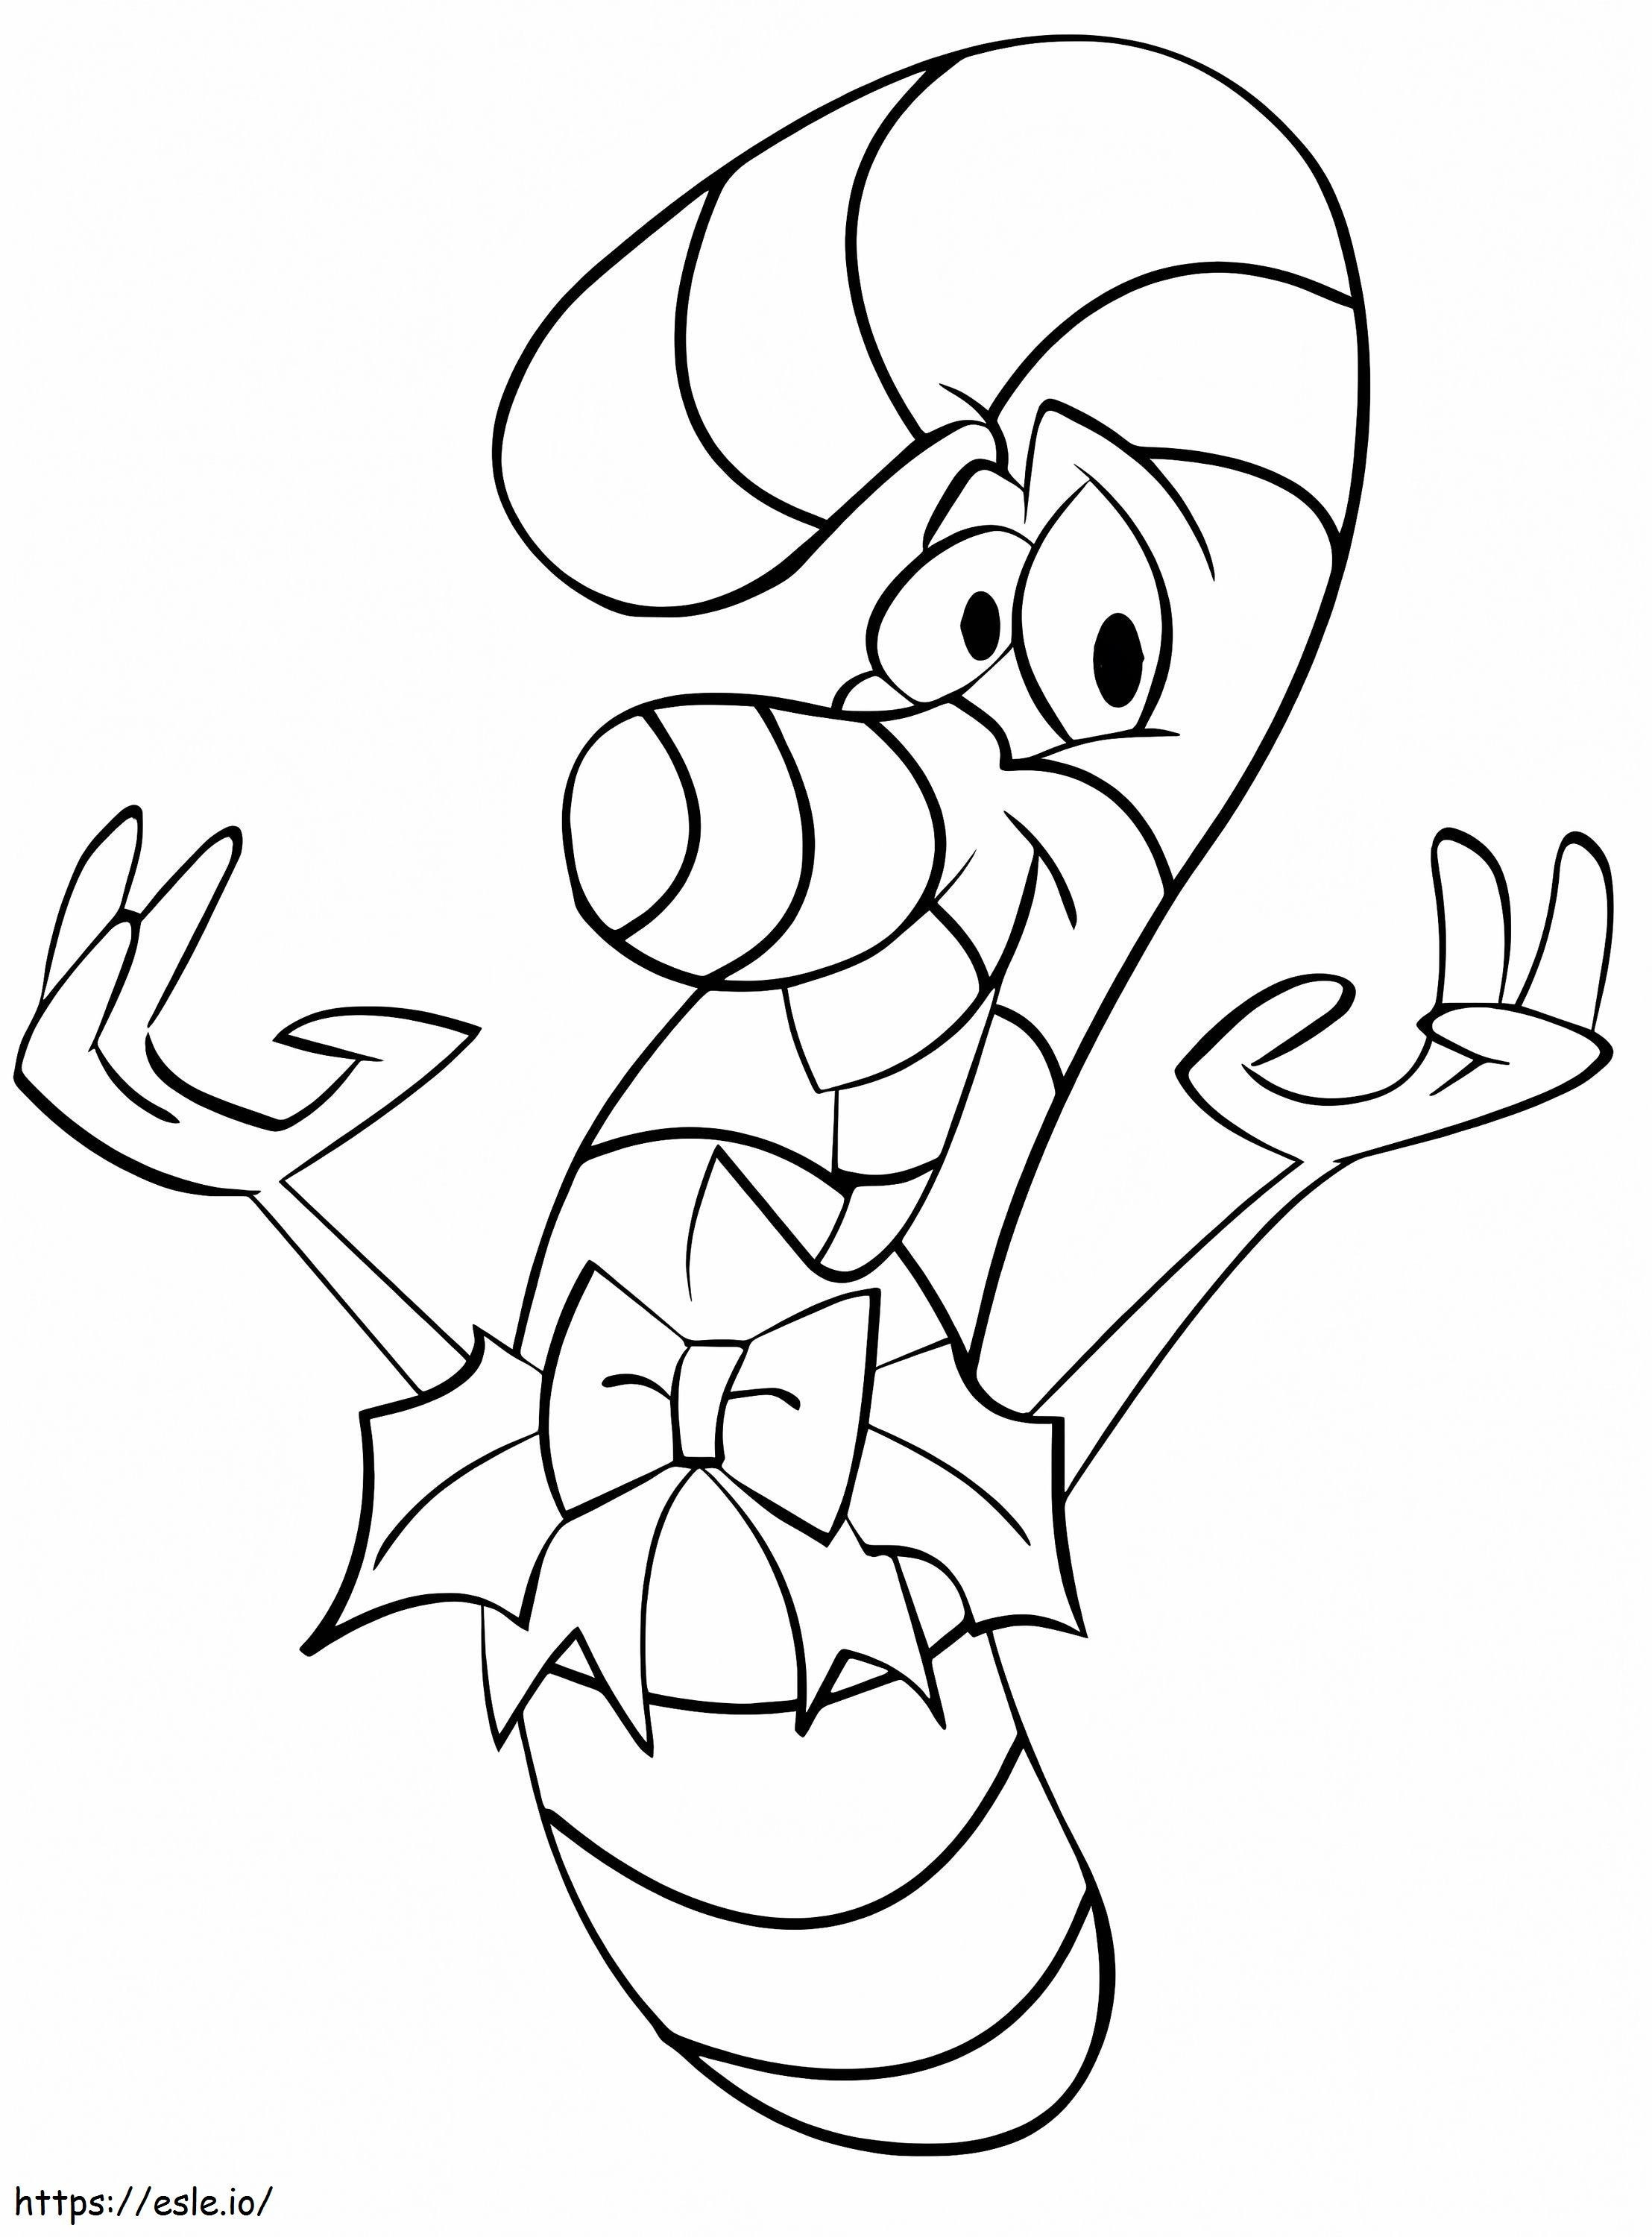 Cartoon Candy Cane coloring page